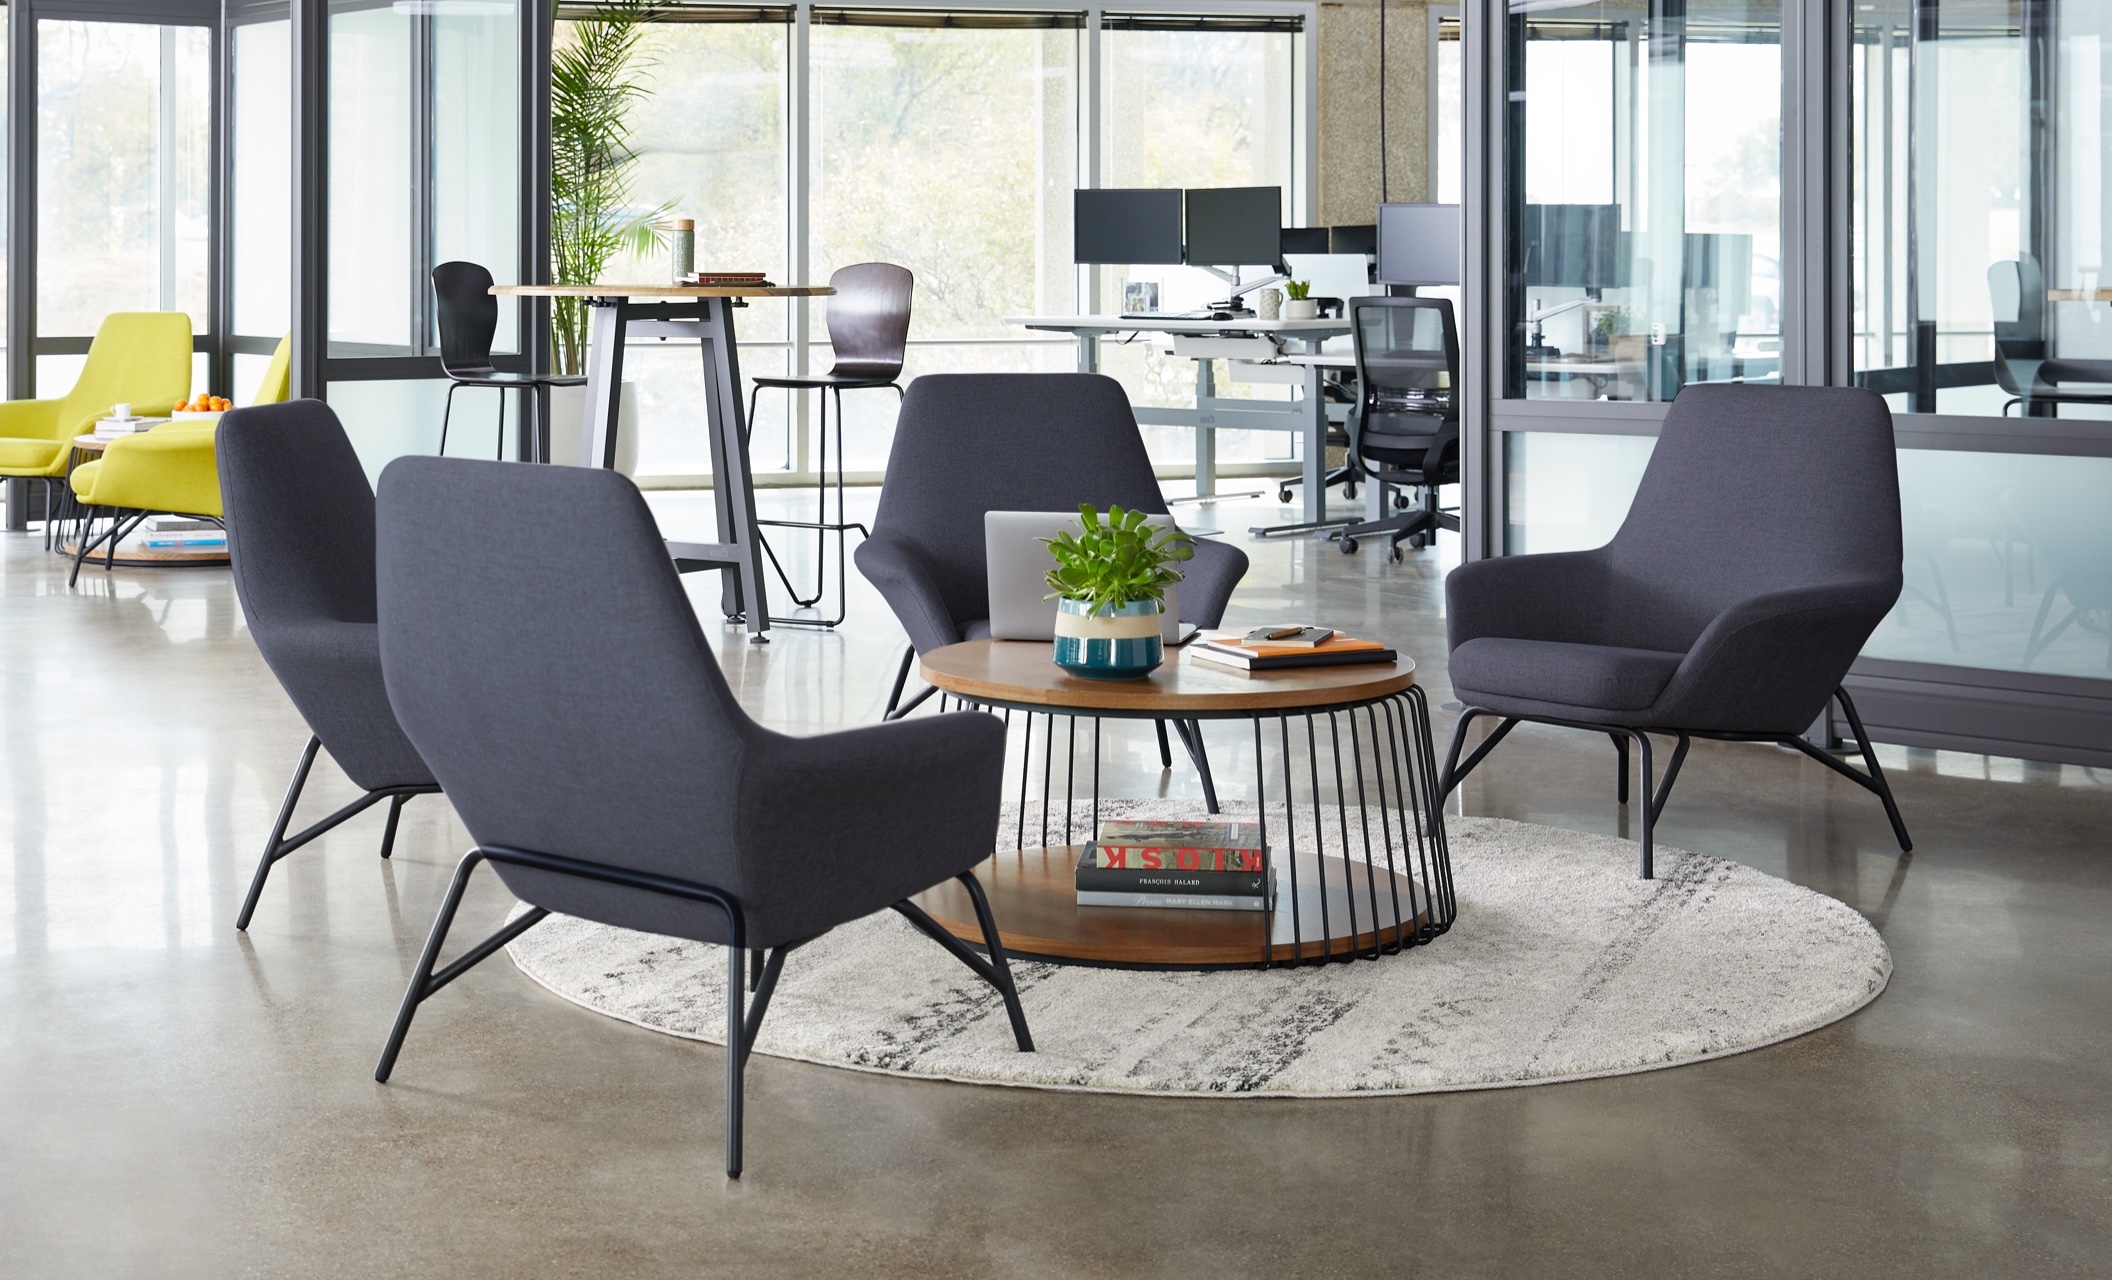 two chairs in navy are positioned around a coffee table